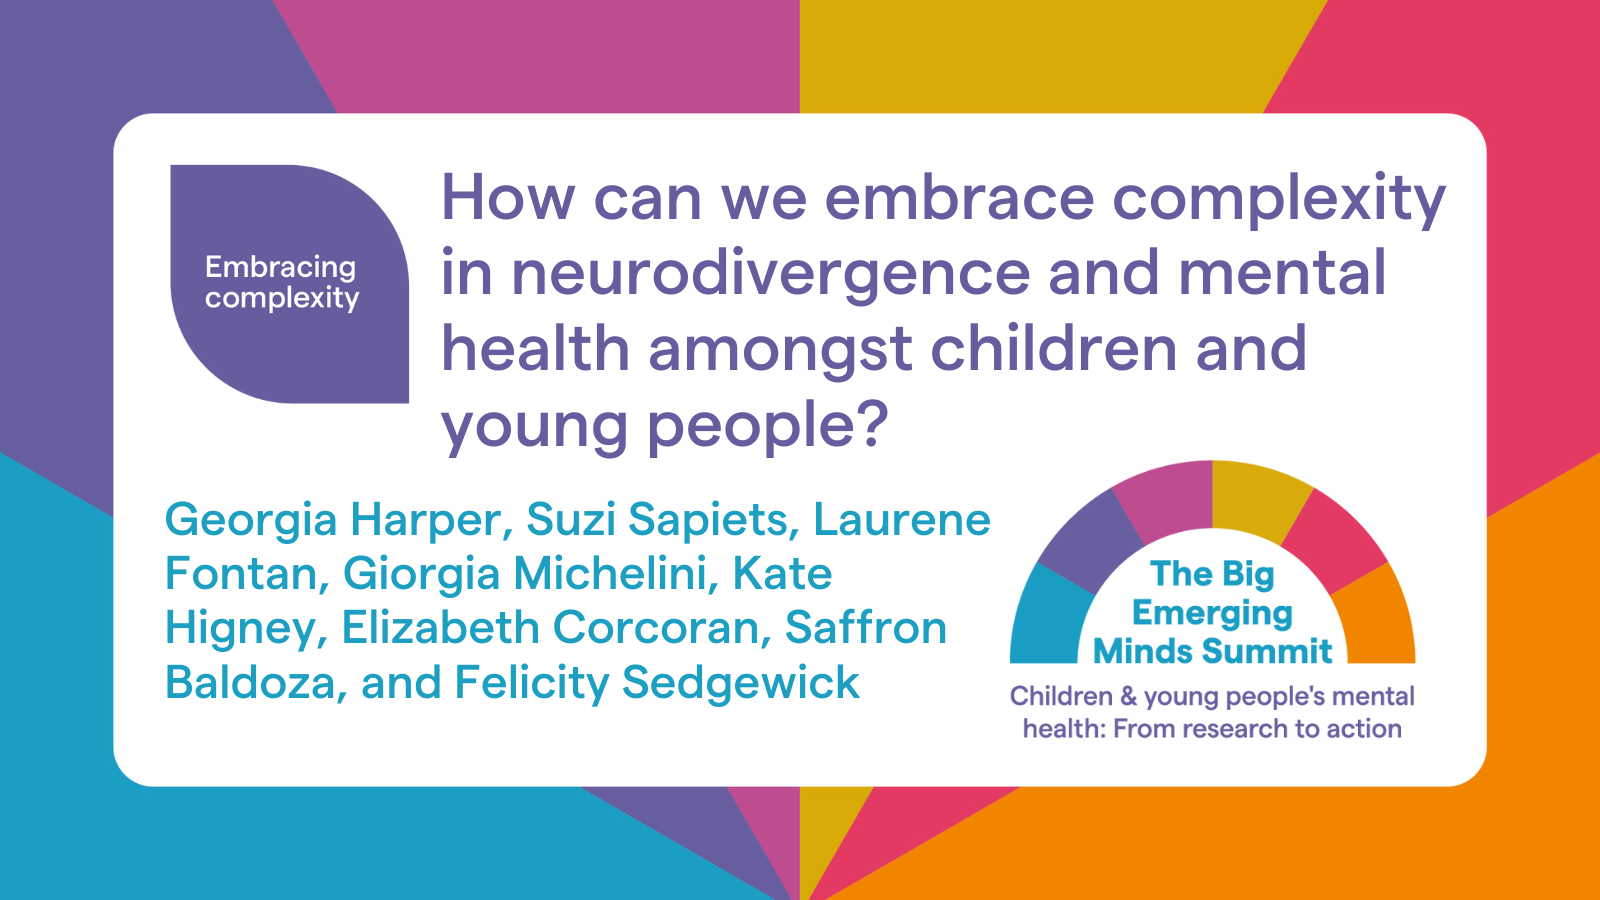 How can we embrace complexity in neurodivergence and mental health amongst children and young people?